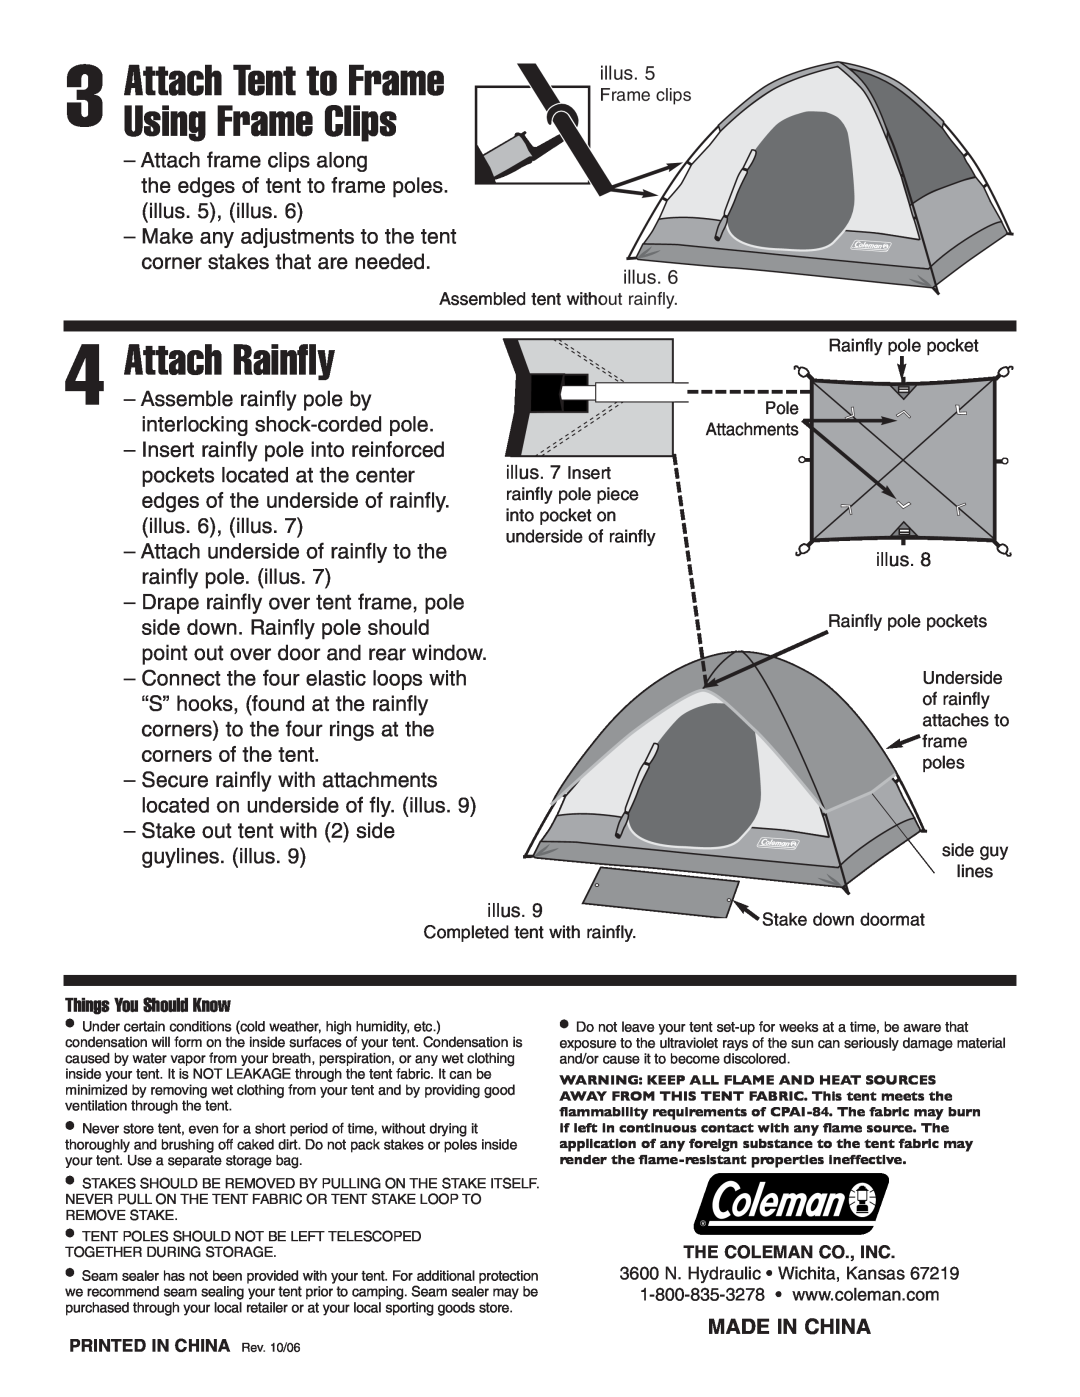 Coleman 9180B907 manual Attach Rainfly, Attach Tent to Frame Using Frame Clips, Made In China 